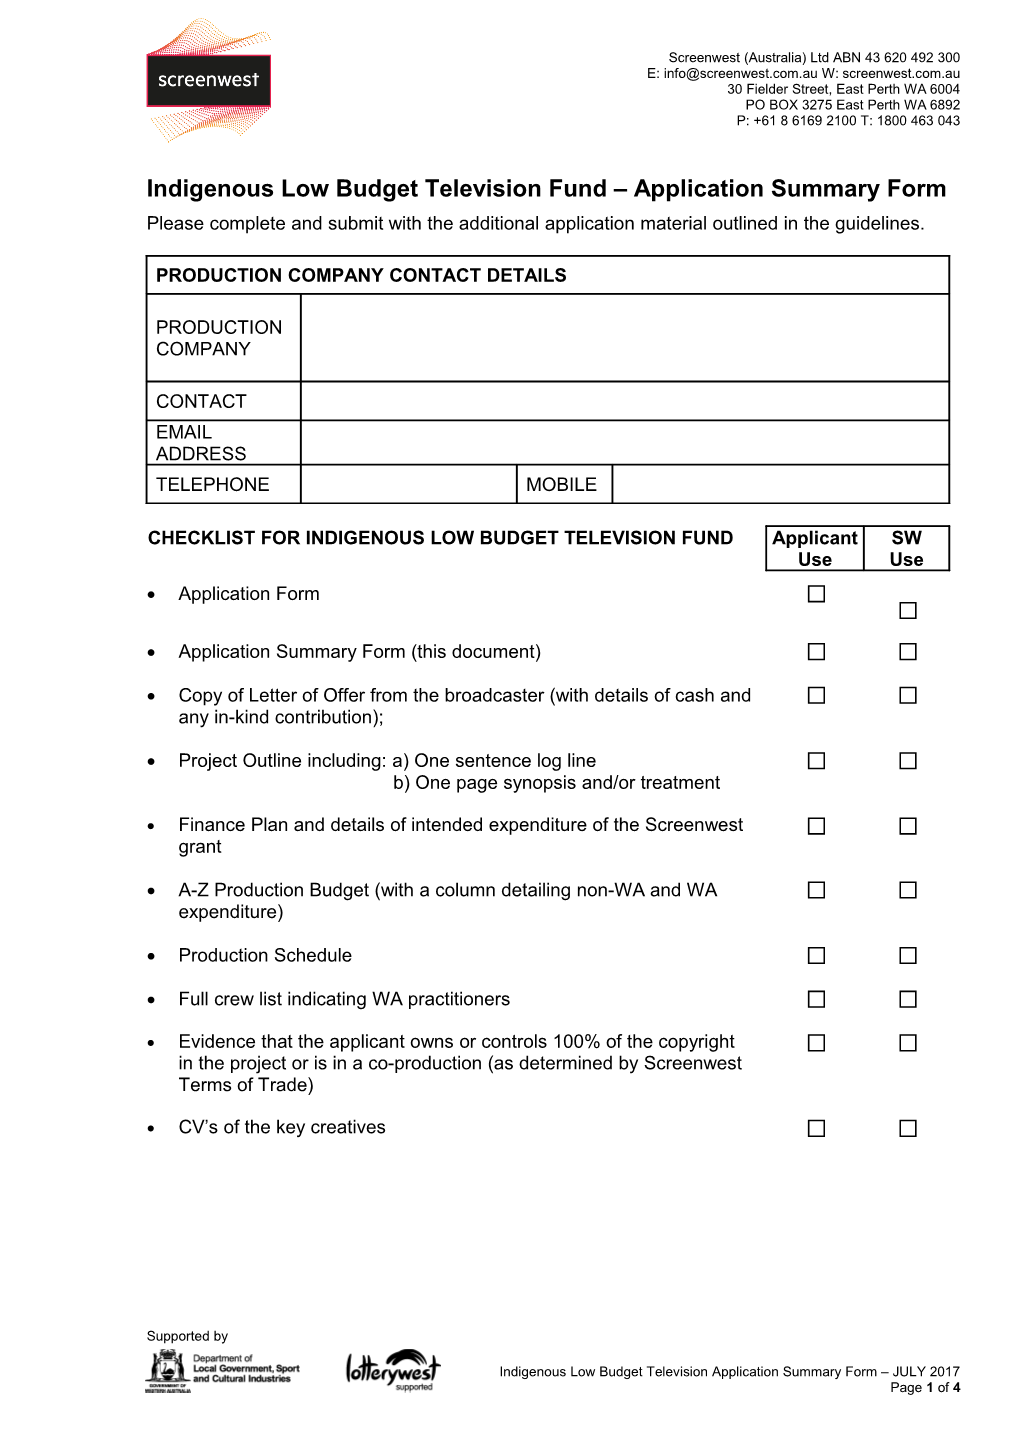 Indigenous Low Budget Television Fund Application Summary Form